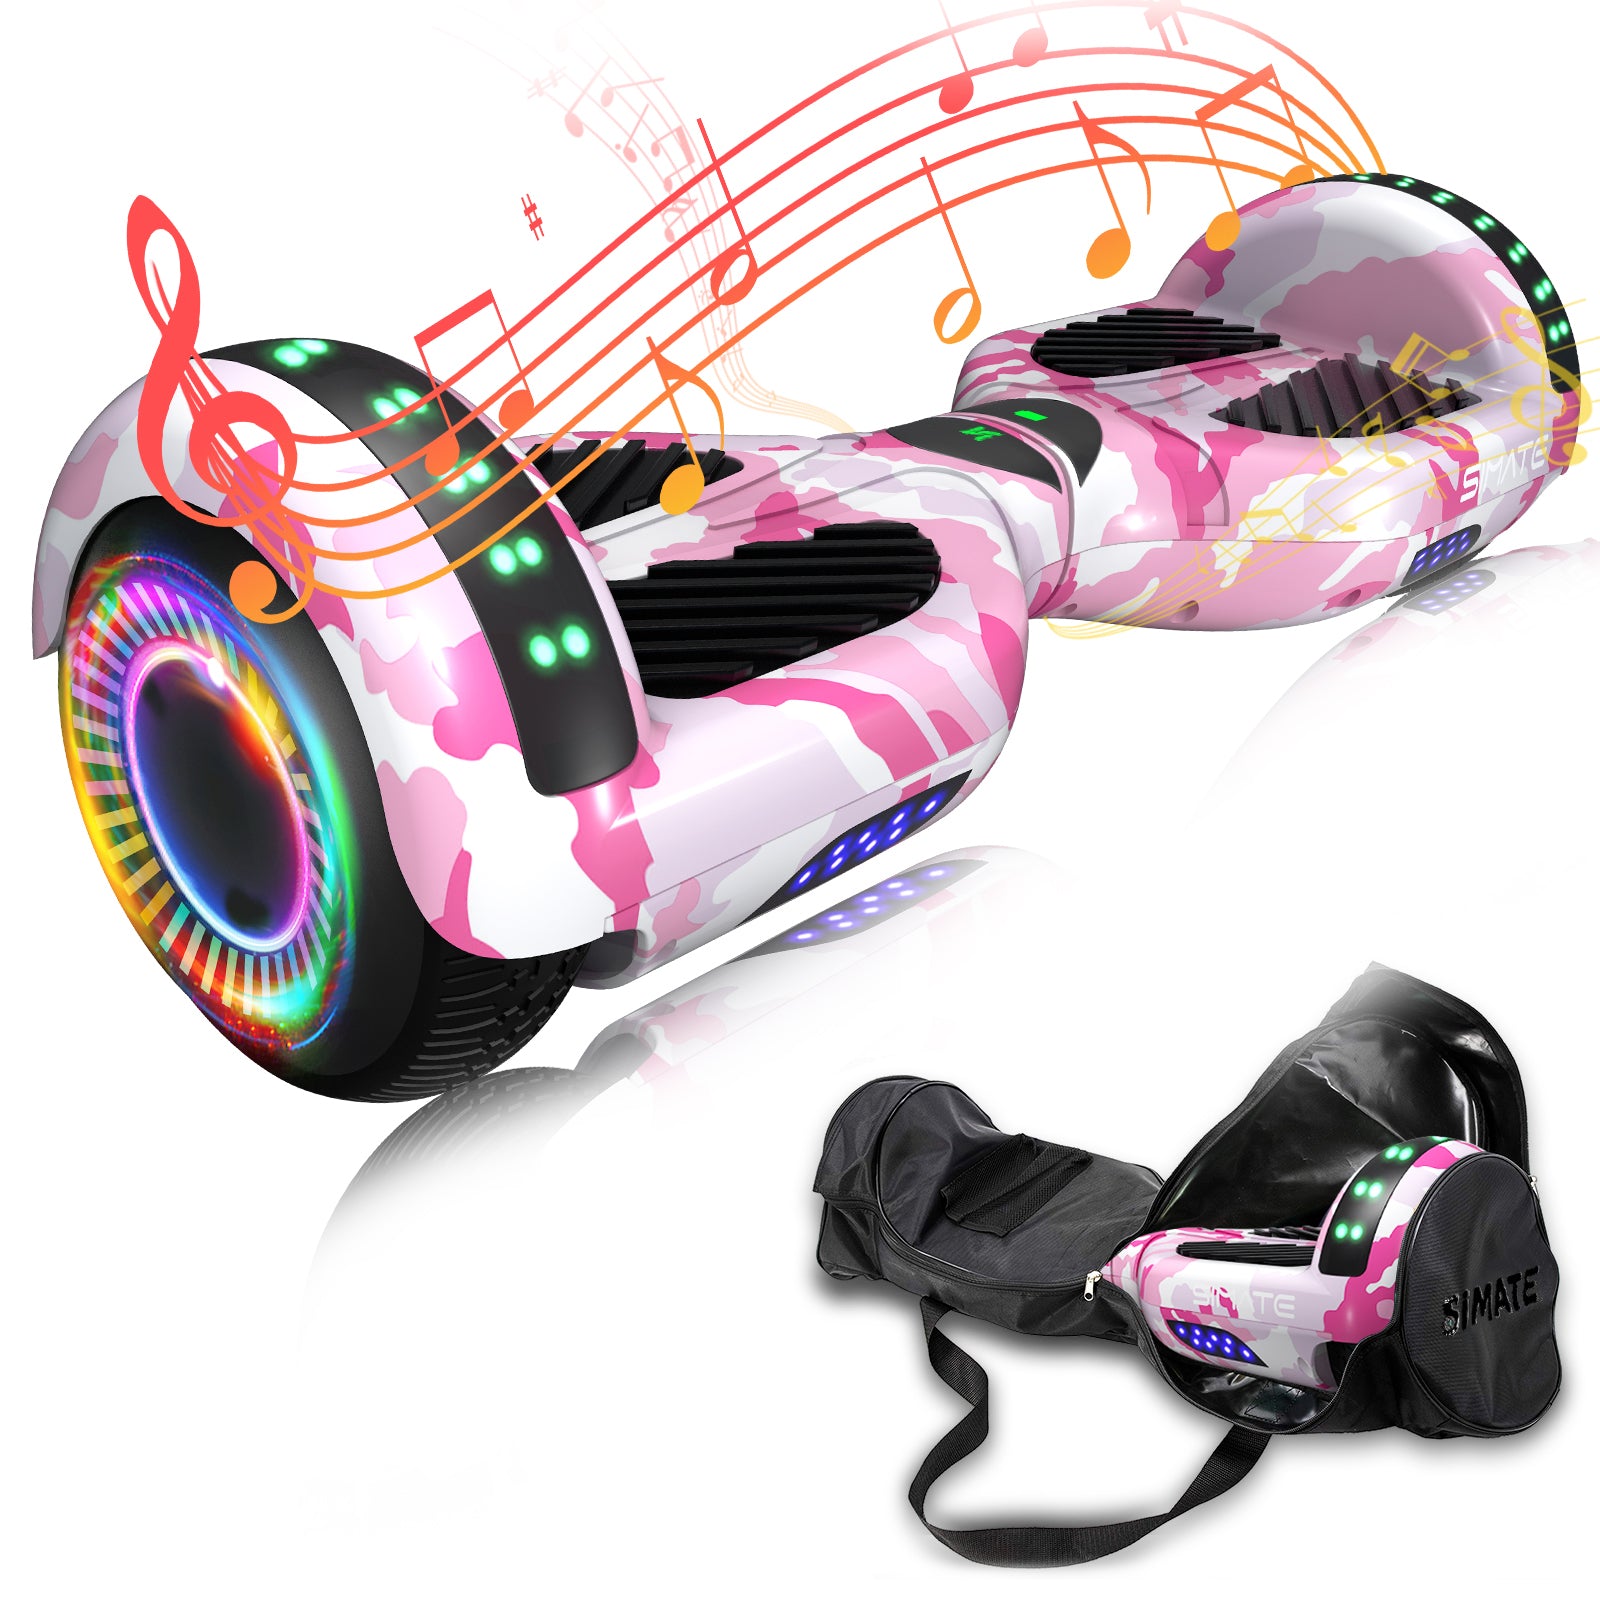 Apato 6.5'' Hoverboard For Kids -  Pink Camo